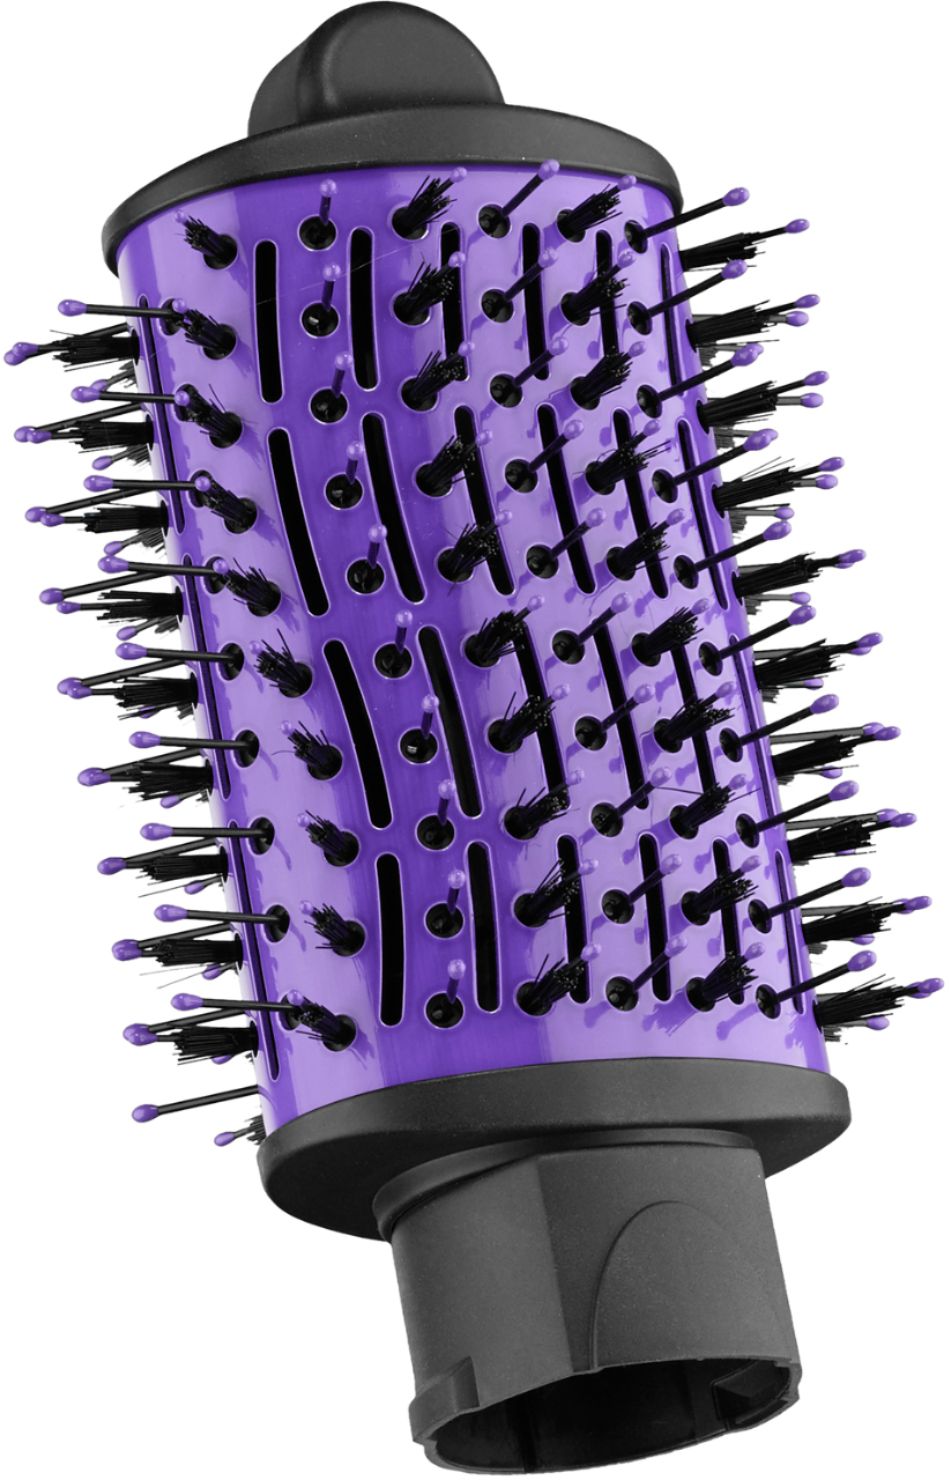 Conair - All-in-One Dryer Brush - Purple And Black_15